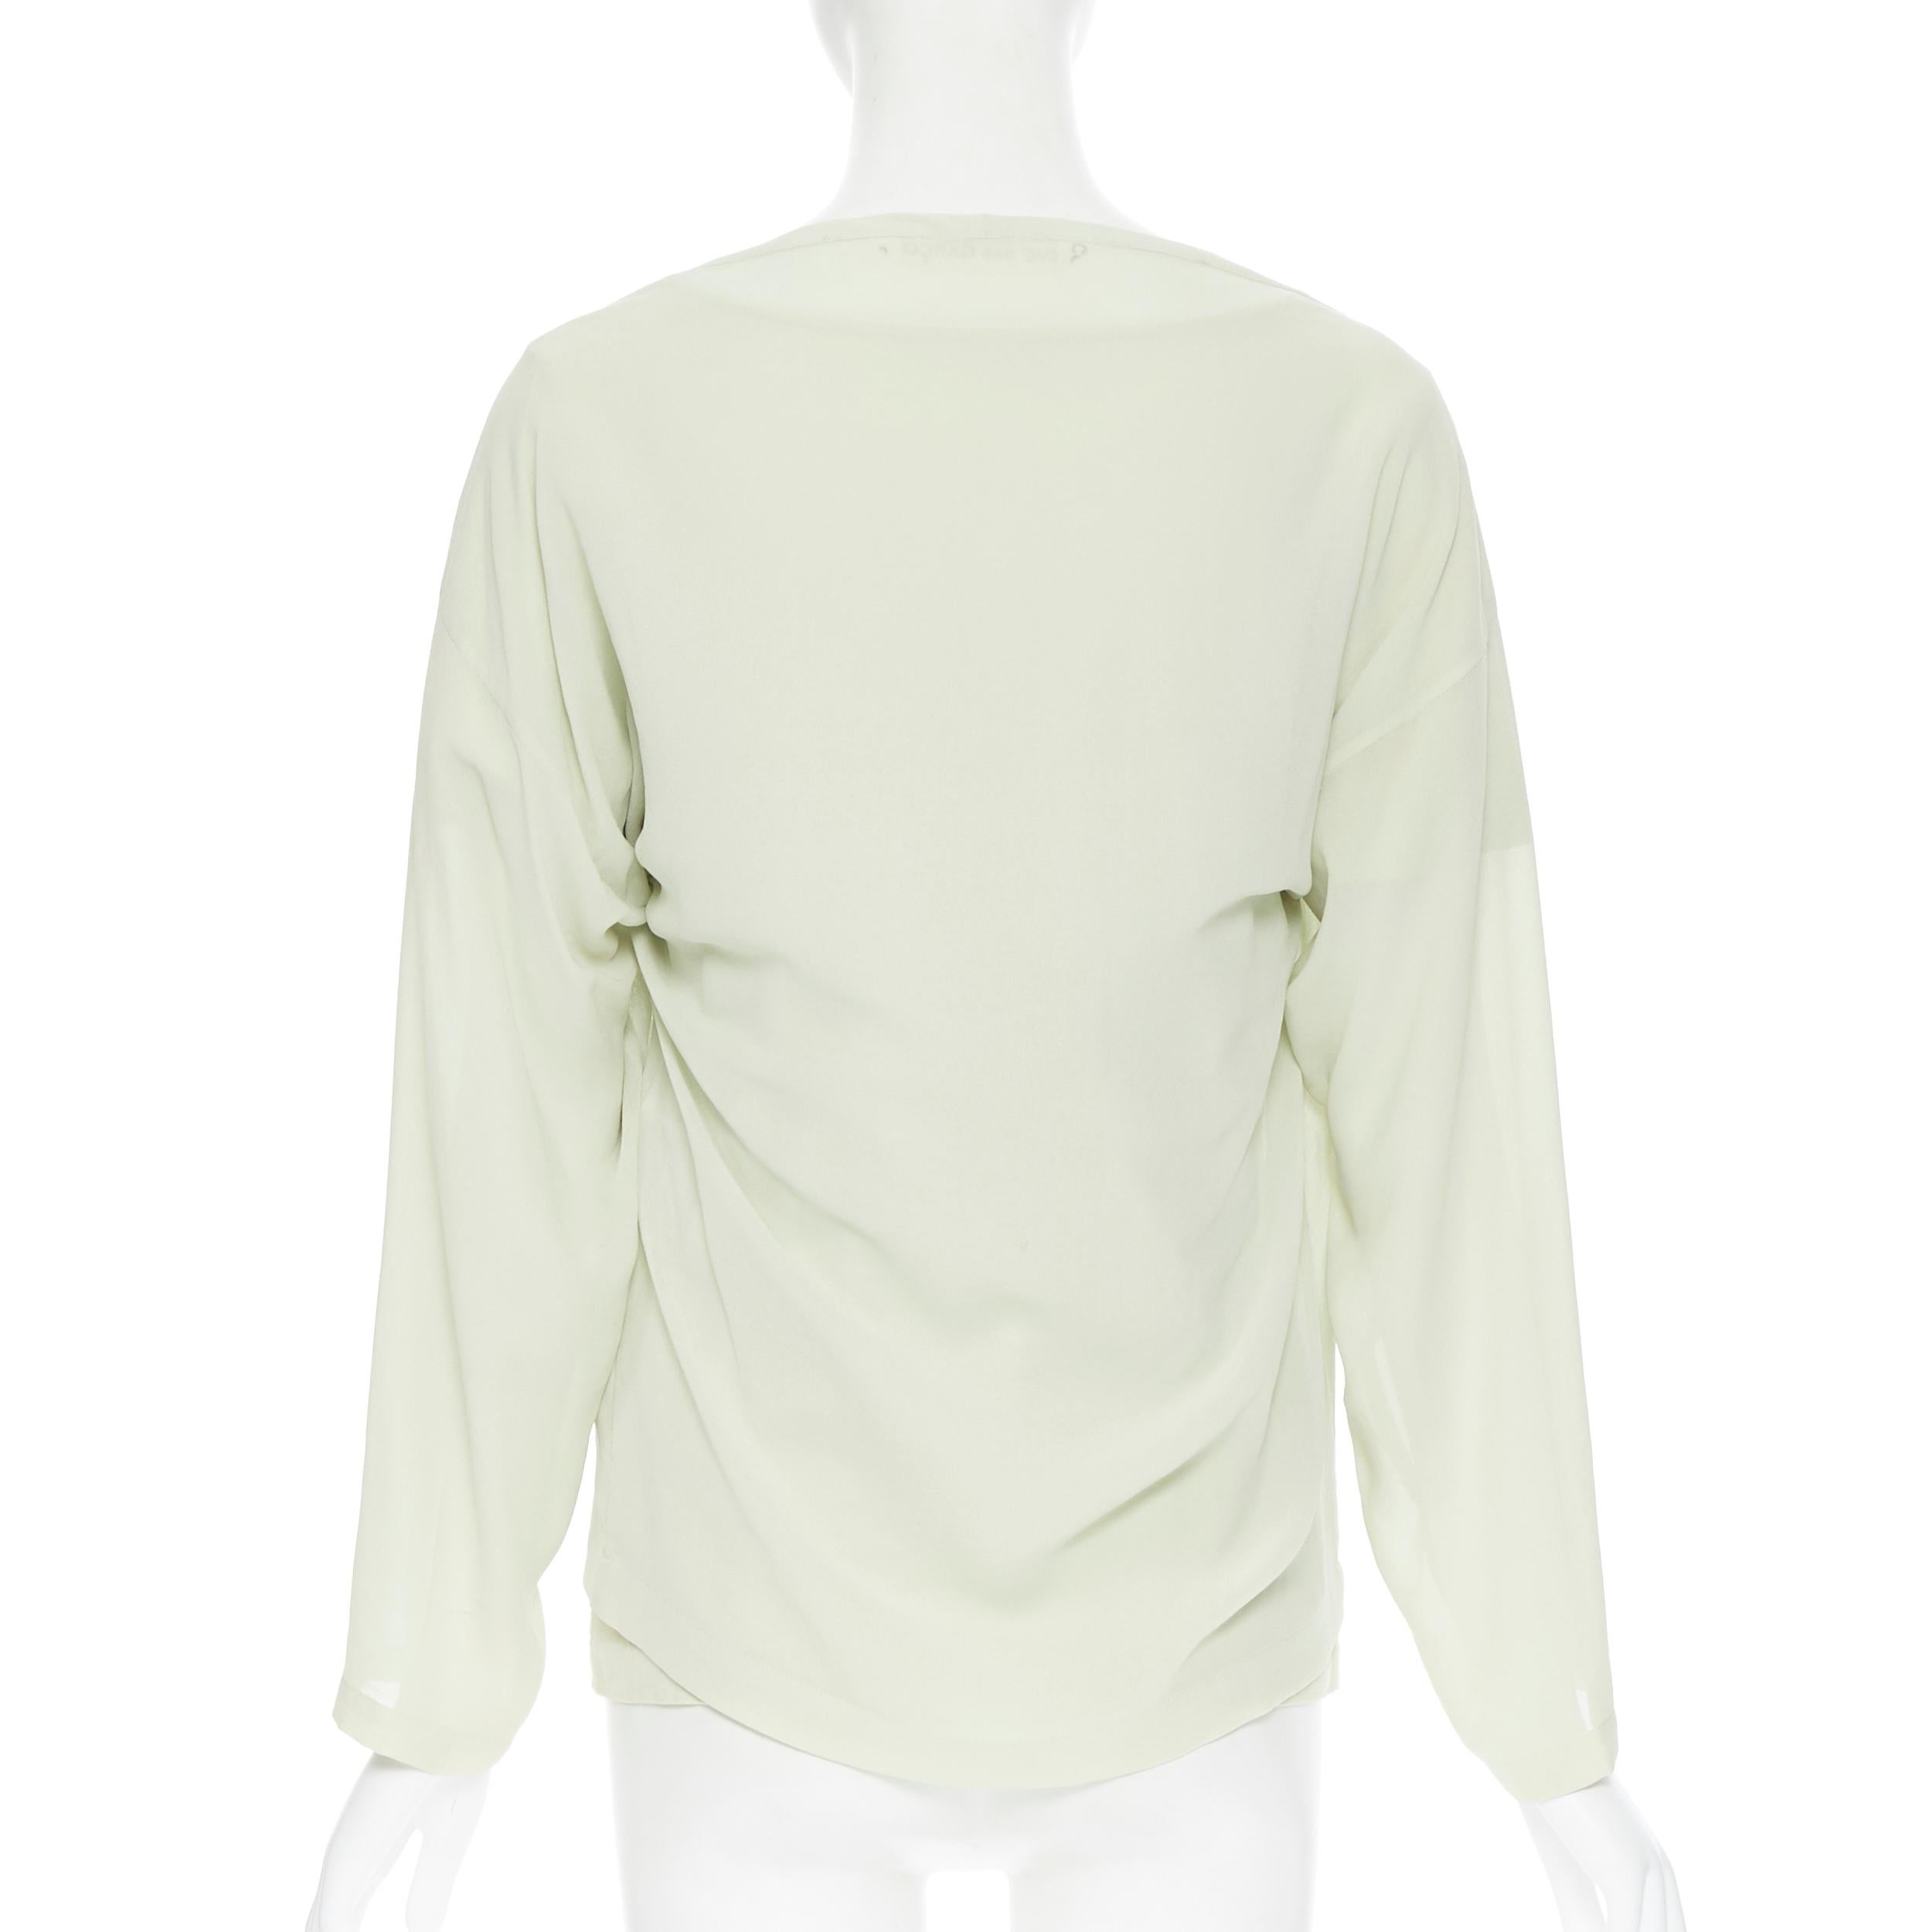 white and green comme des garcons shirt